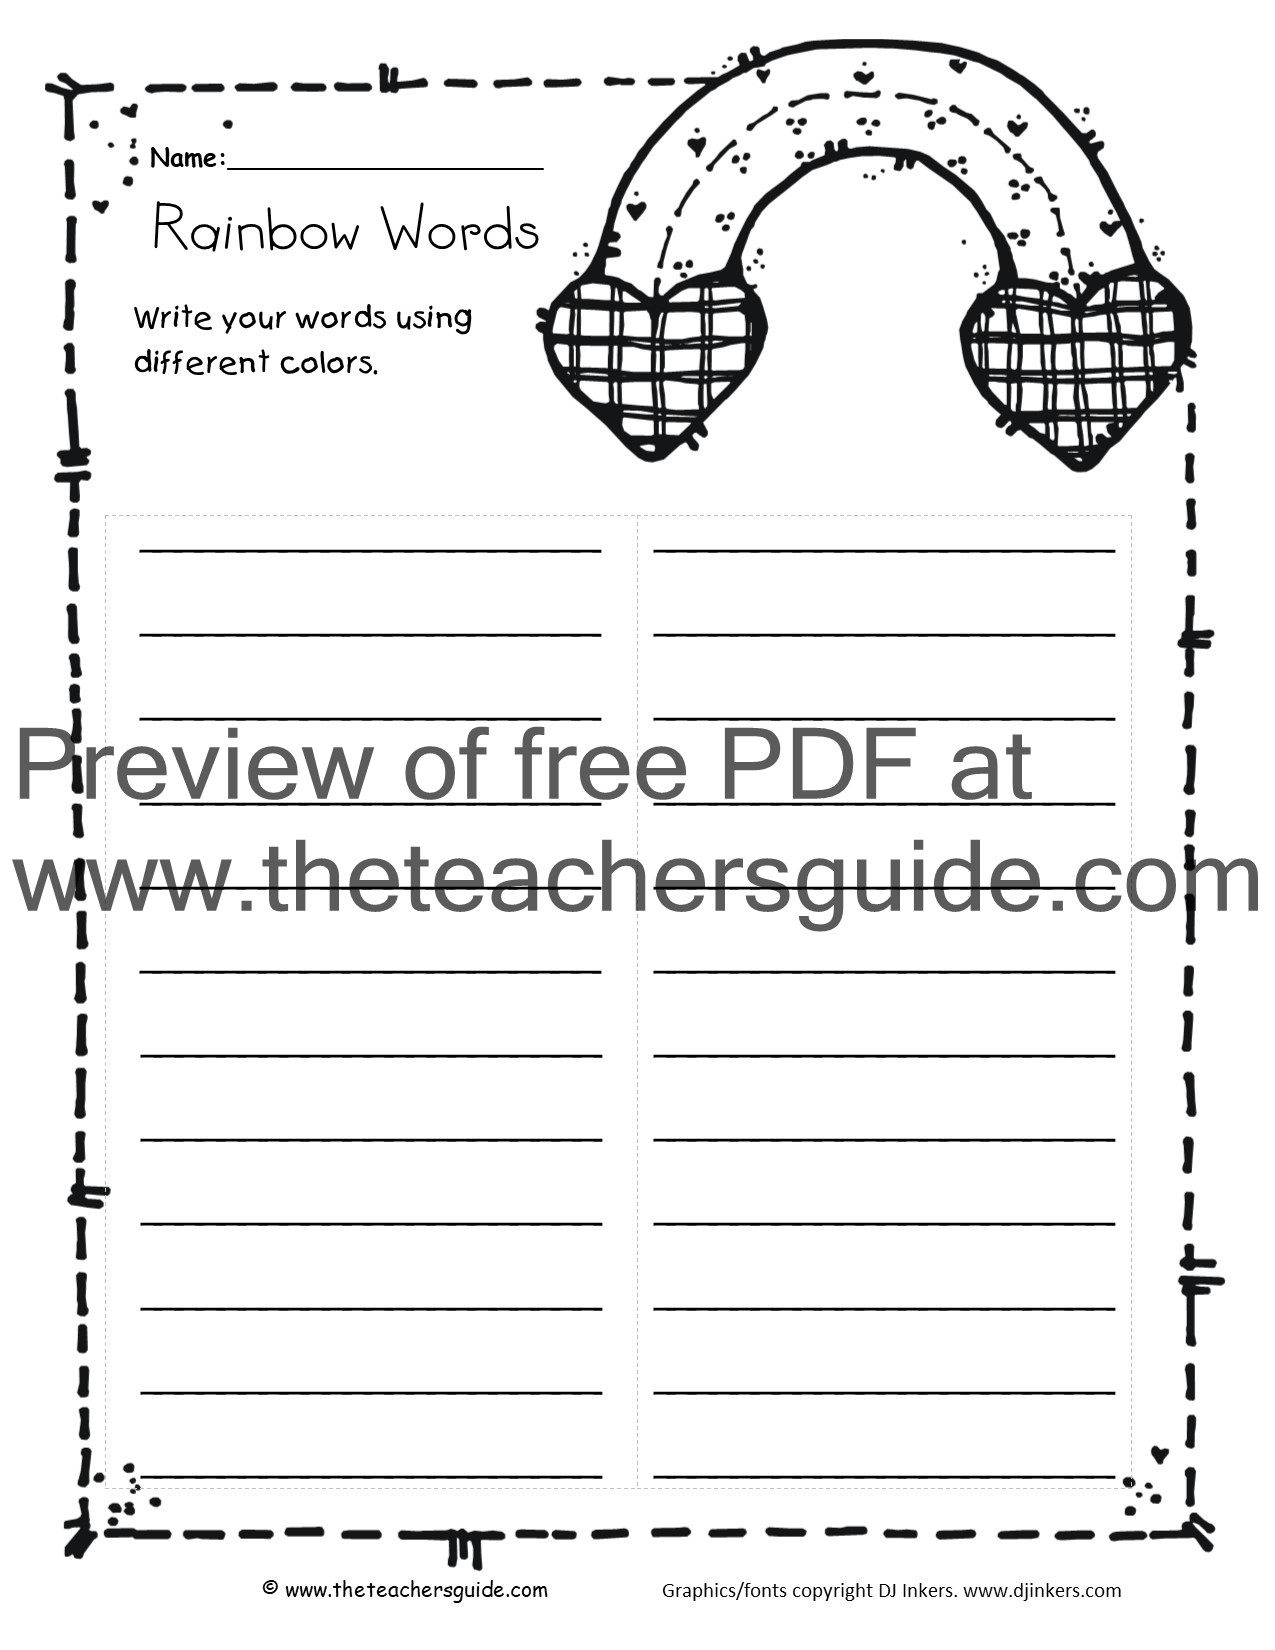 Summary Worksheets 2nd Grade the Teacher S Guide Free Lesson Plans Printouts and